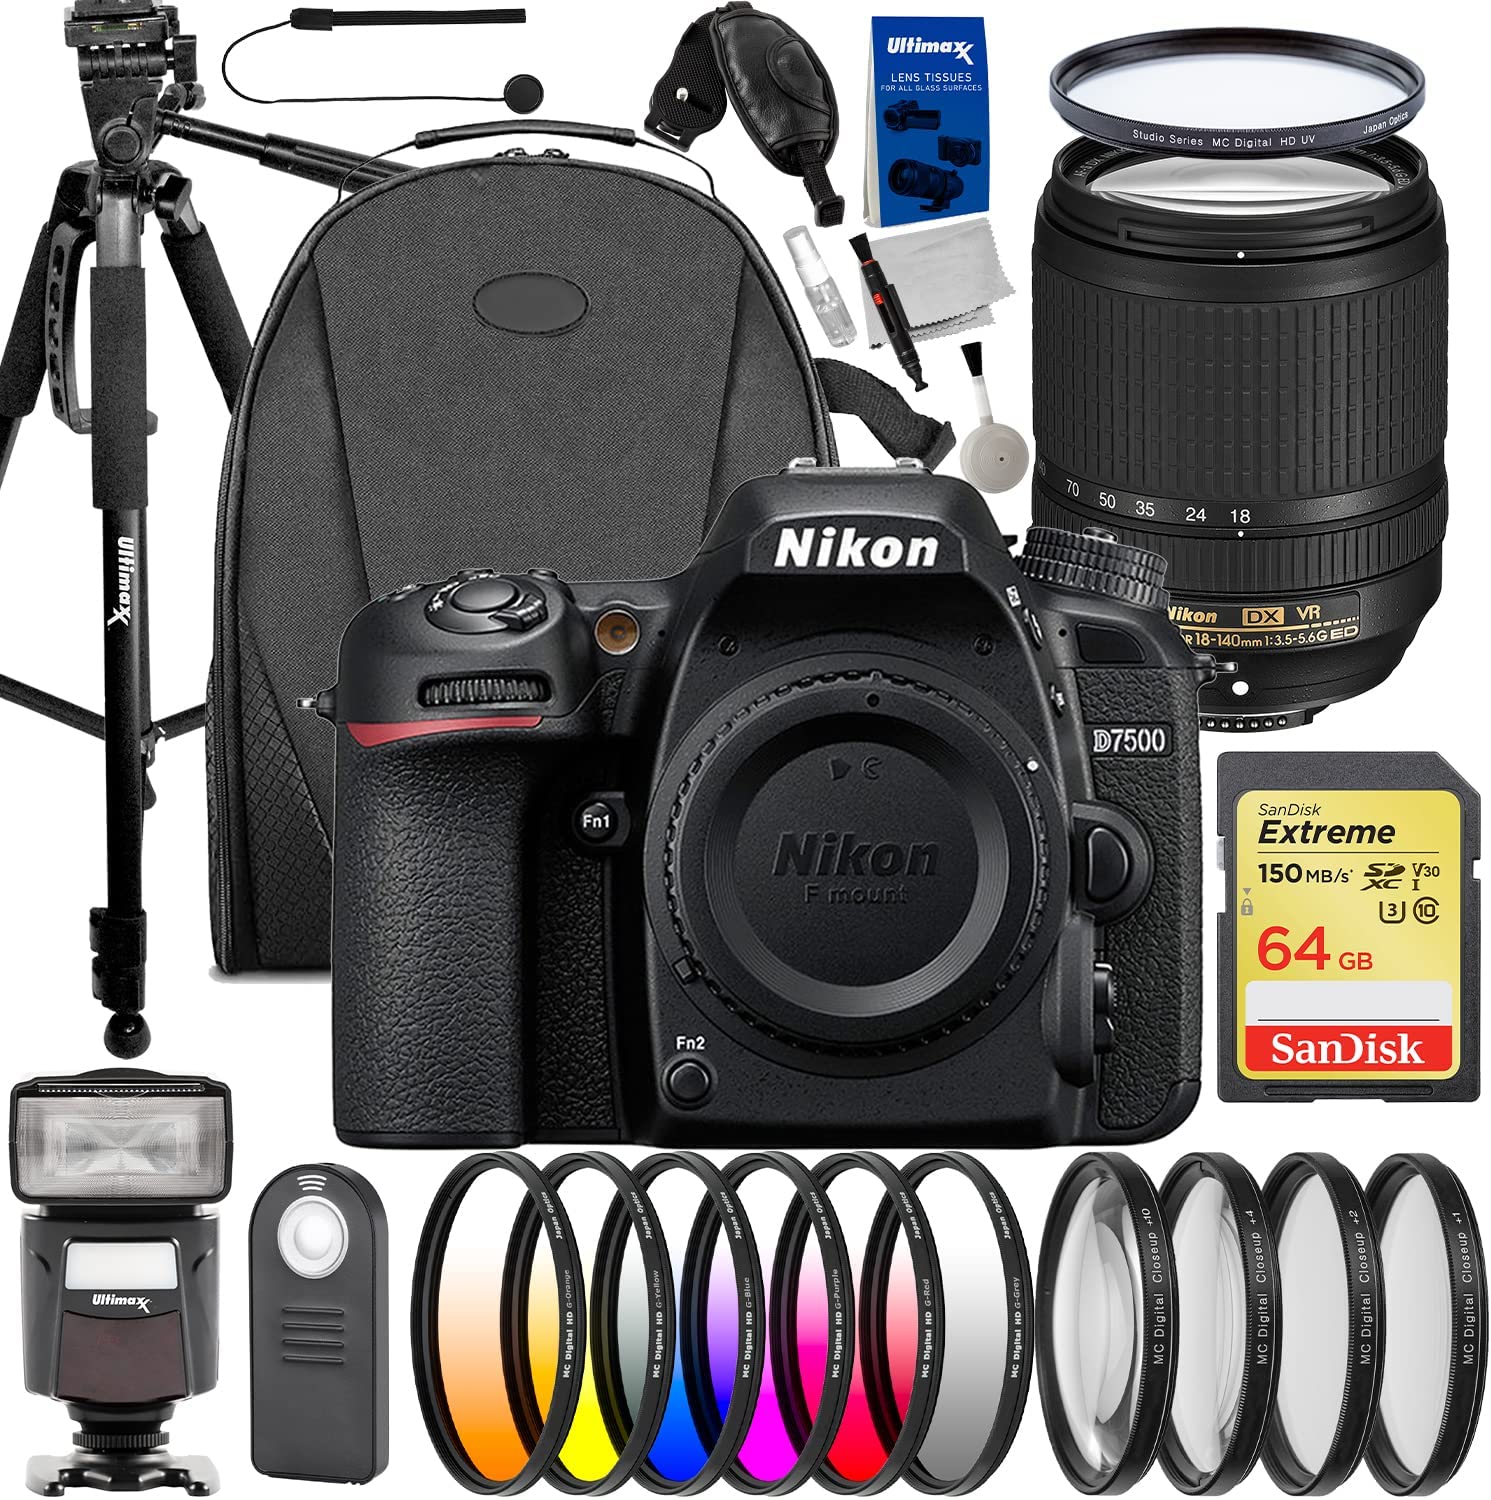 Nikon D7500 DSLR Camera with 18-140mm Lens + SanDisk Extreme 64GB SDXC, Lightweight 60” Tripod, Universal Speedlite with LED Video Light, Infrared Universal Shutter Remote & Much More (32pc Bundle)